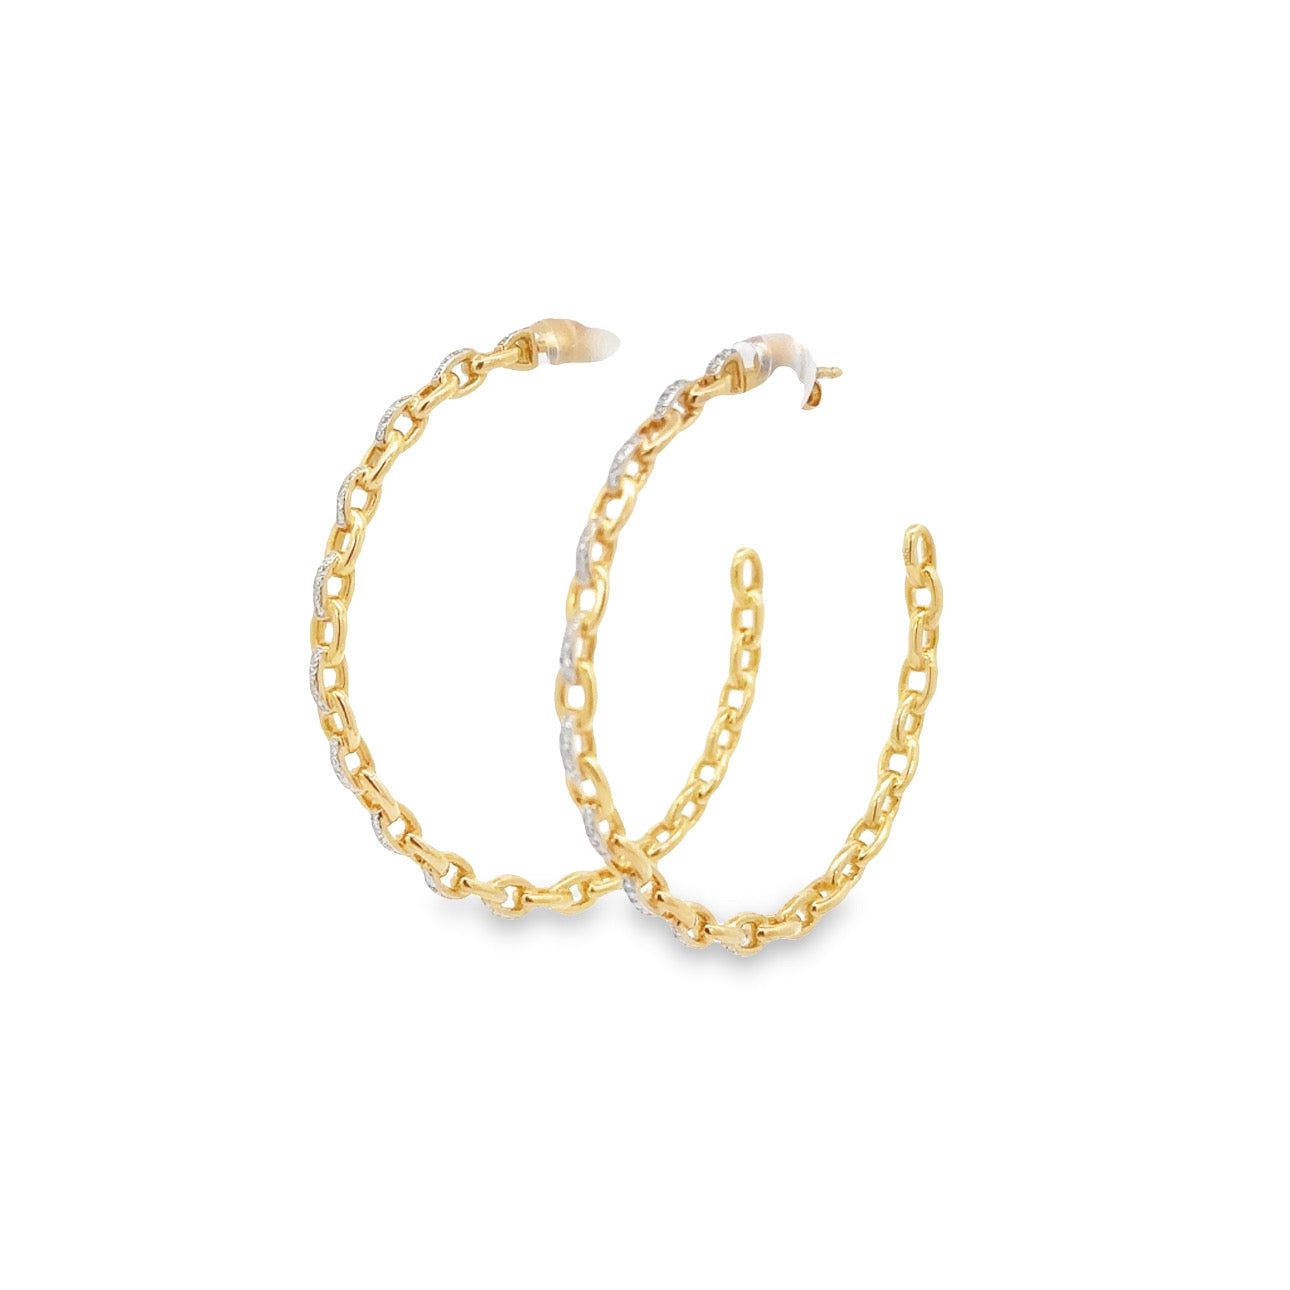 WD1236 14kt Gold Link Chain Hoop Earring with Diamond Detail